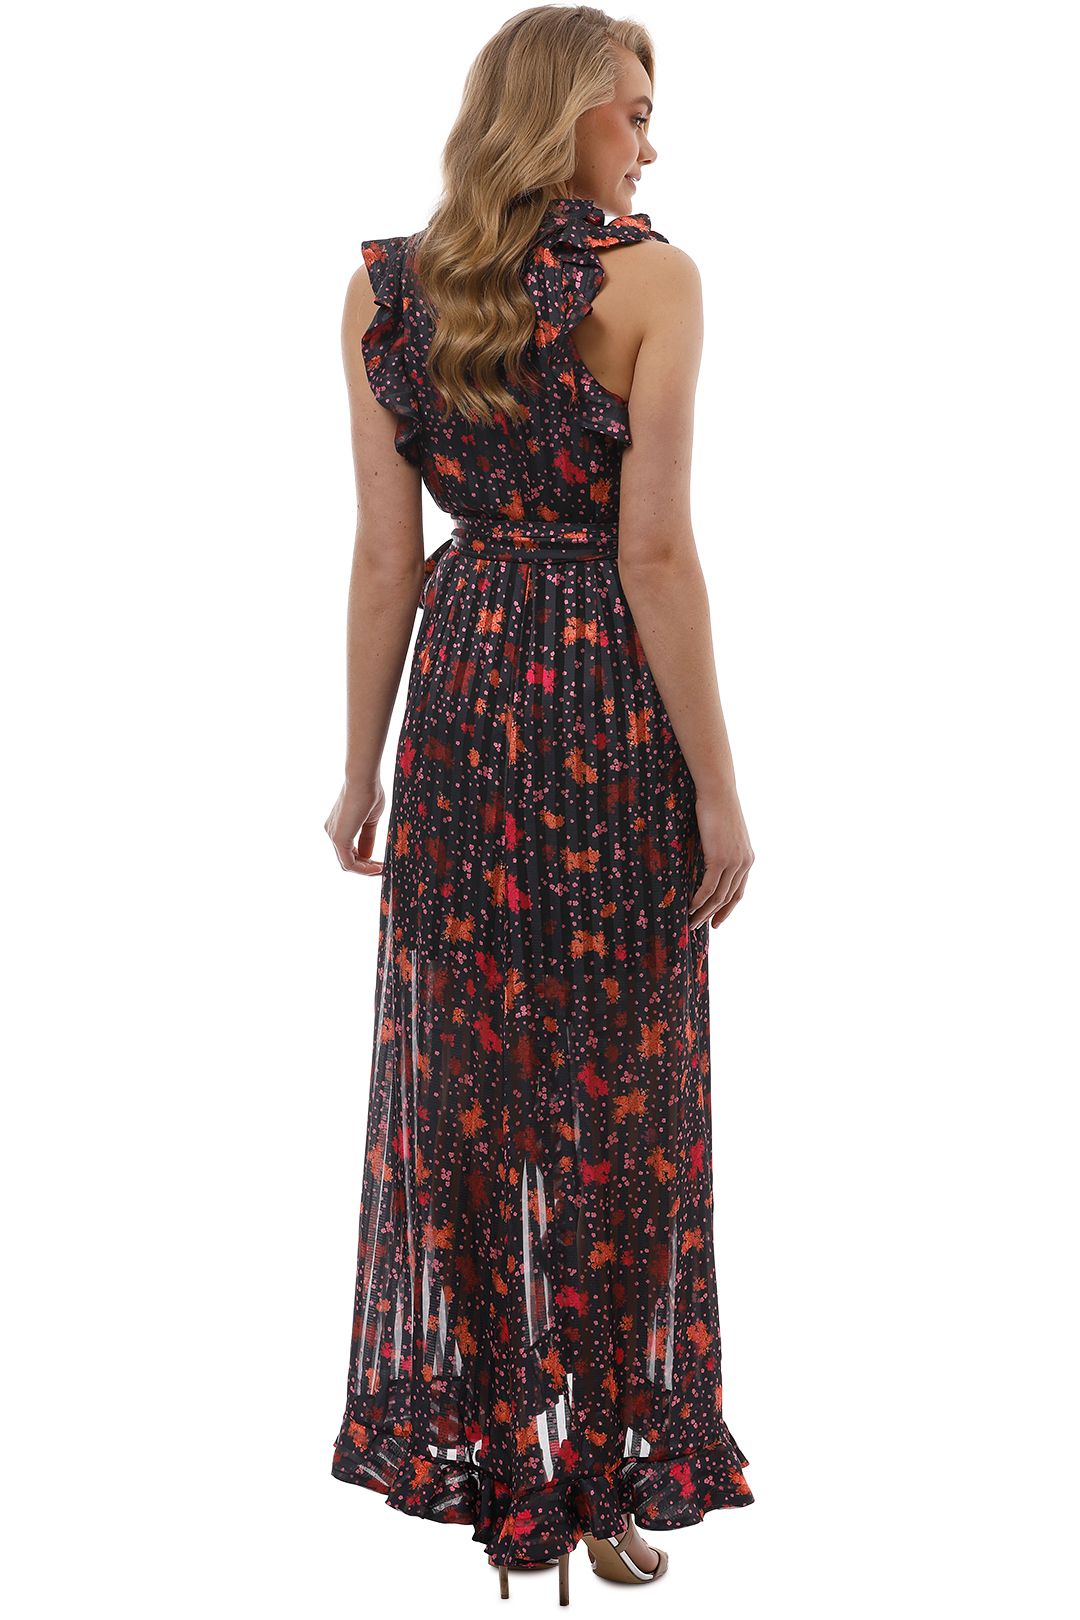 CMEO Collective - Significant Gown - Black Rose - Back